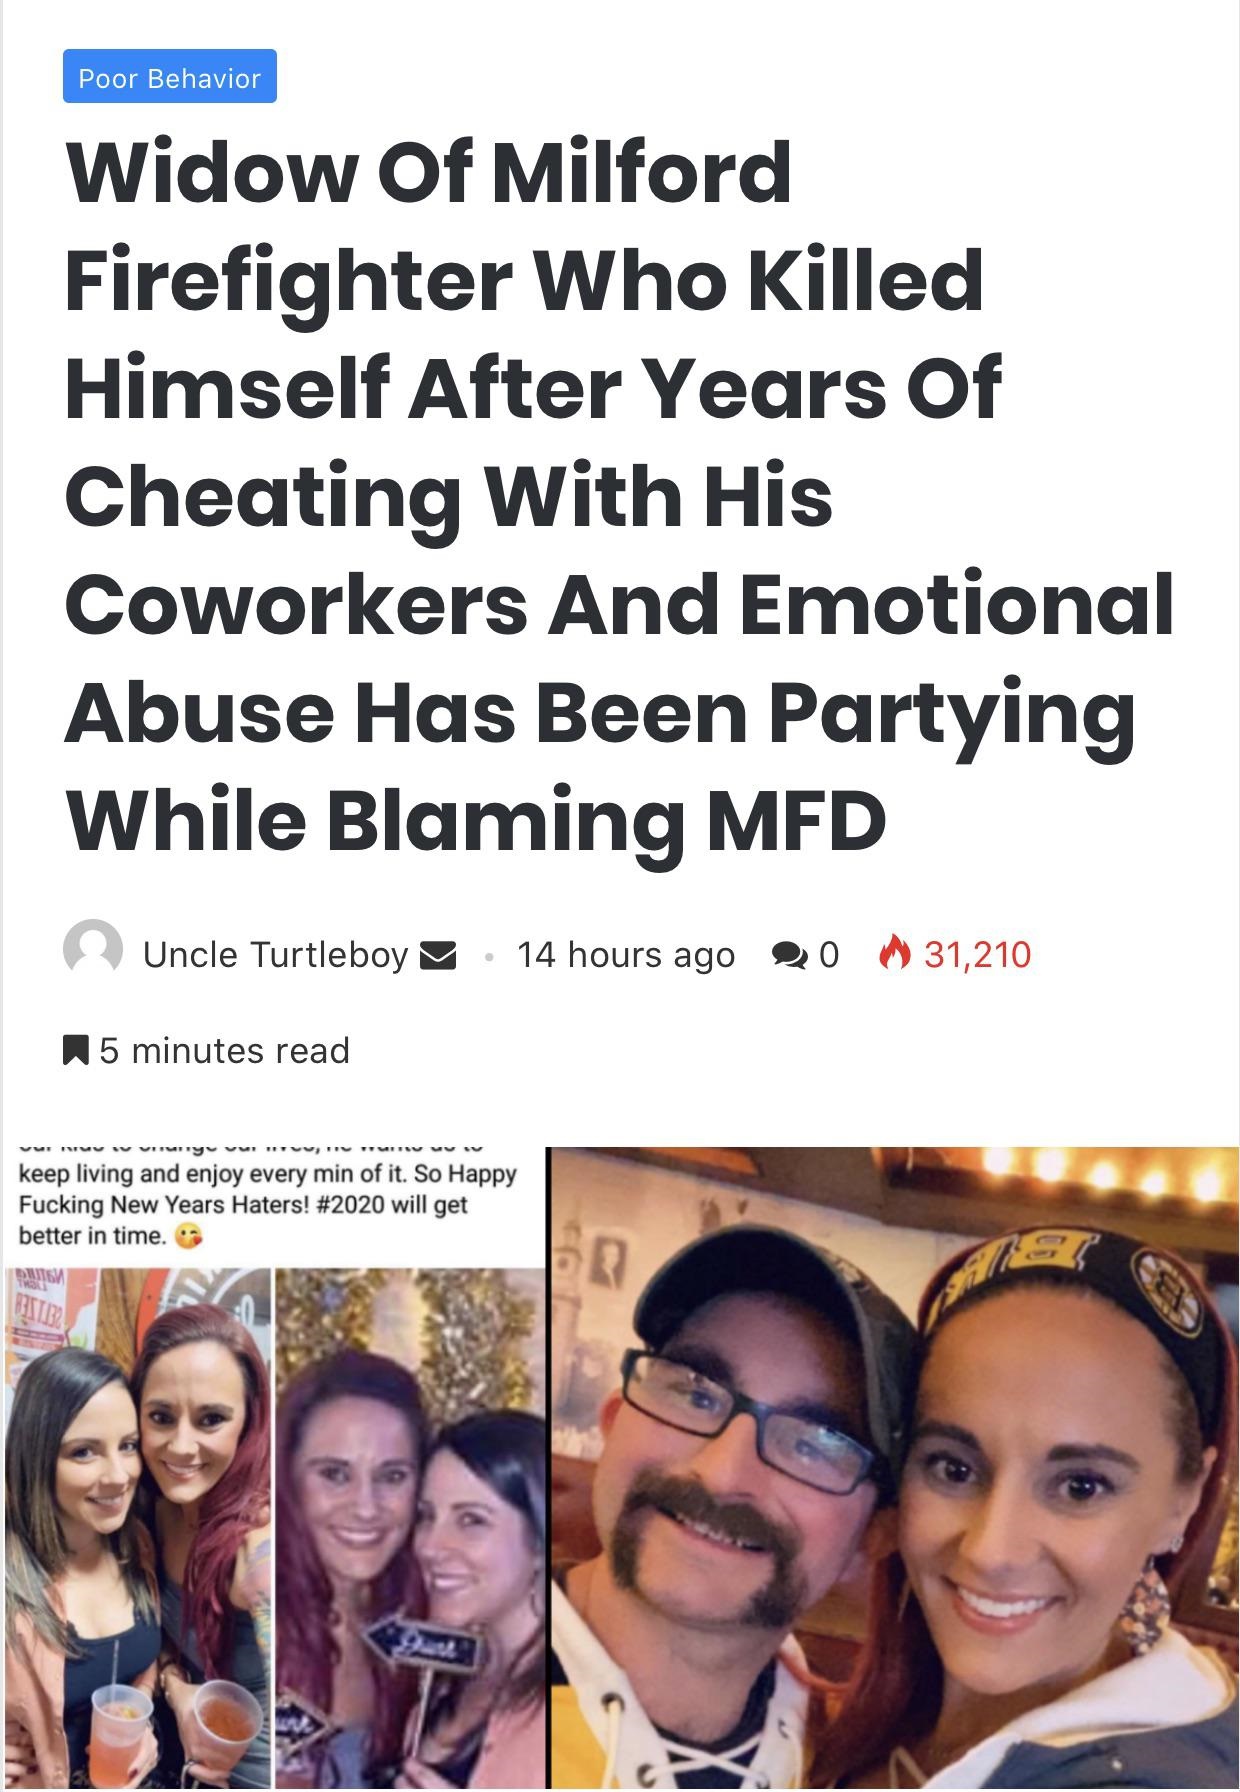 smile - Poor Behavior Widow Of Milford Firefighter Who Killed Himself After Years Of Cheating With His Coworkers And Emotional Abuse Has Been Partying While Blaming Mfd Uncle Turtleboy V 14 hours ago 20 31,210 15 minutes read keep living and enjoy every m